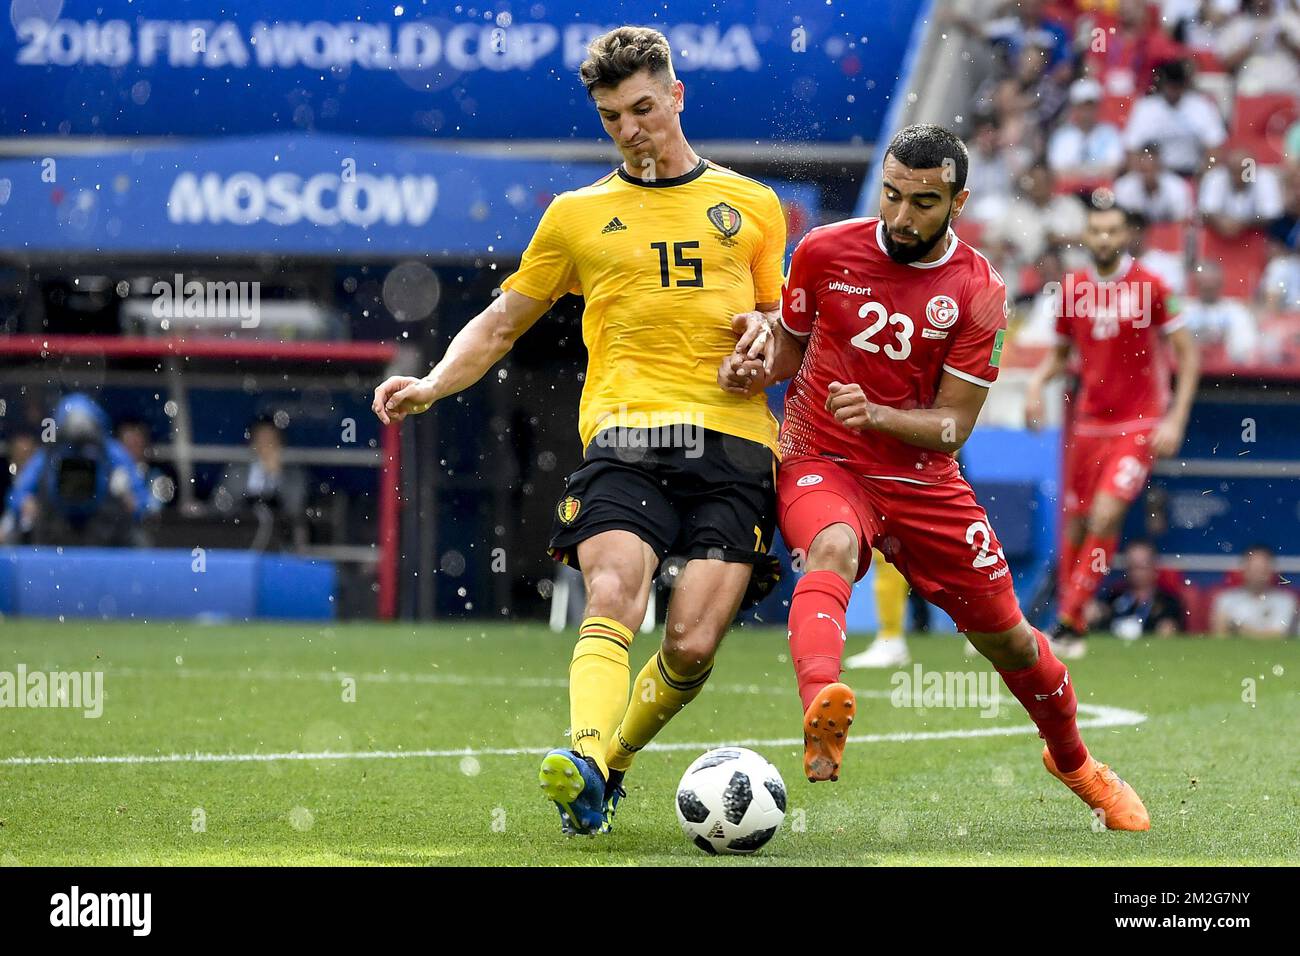 Belgium's Thomas Meunier and Tunesia's Naim Sliti fight for the ball during the second game of Belgian national soccer team the Red Devils against Tunisia national team in the Spartak stadium, in Moscow, Russia, Saturday 23 June 2018. Belgium won its first group phase game. BELGA PHOTO DIRK WAEM Stock Photo